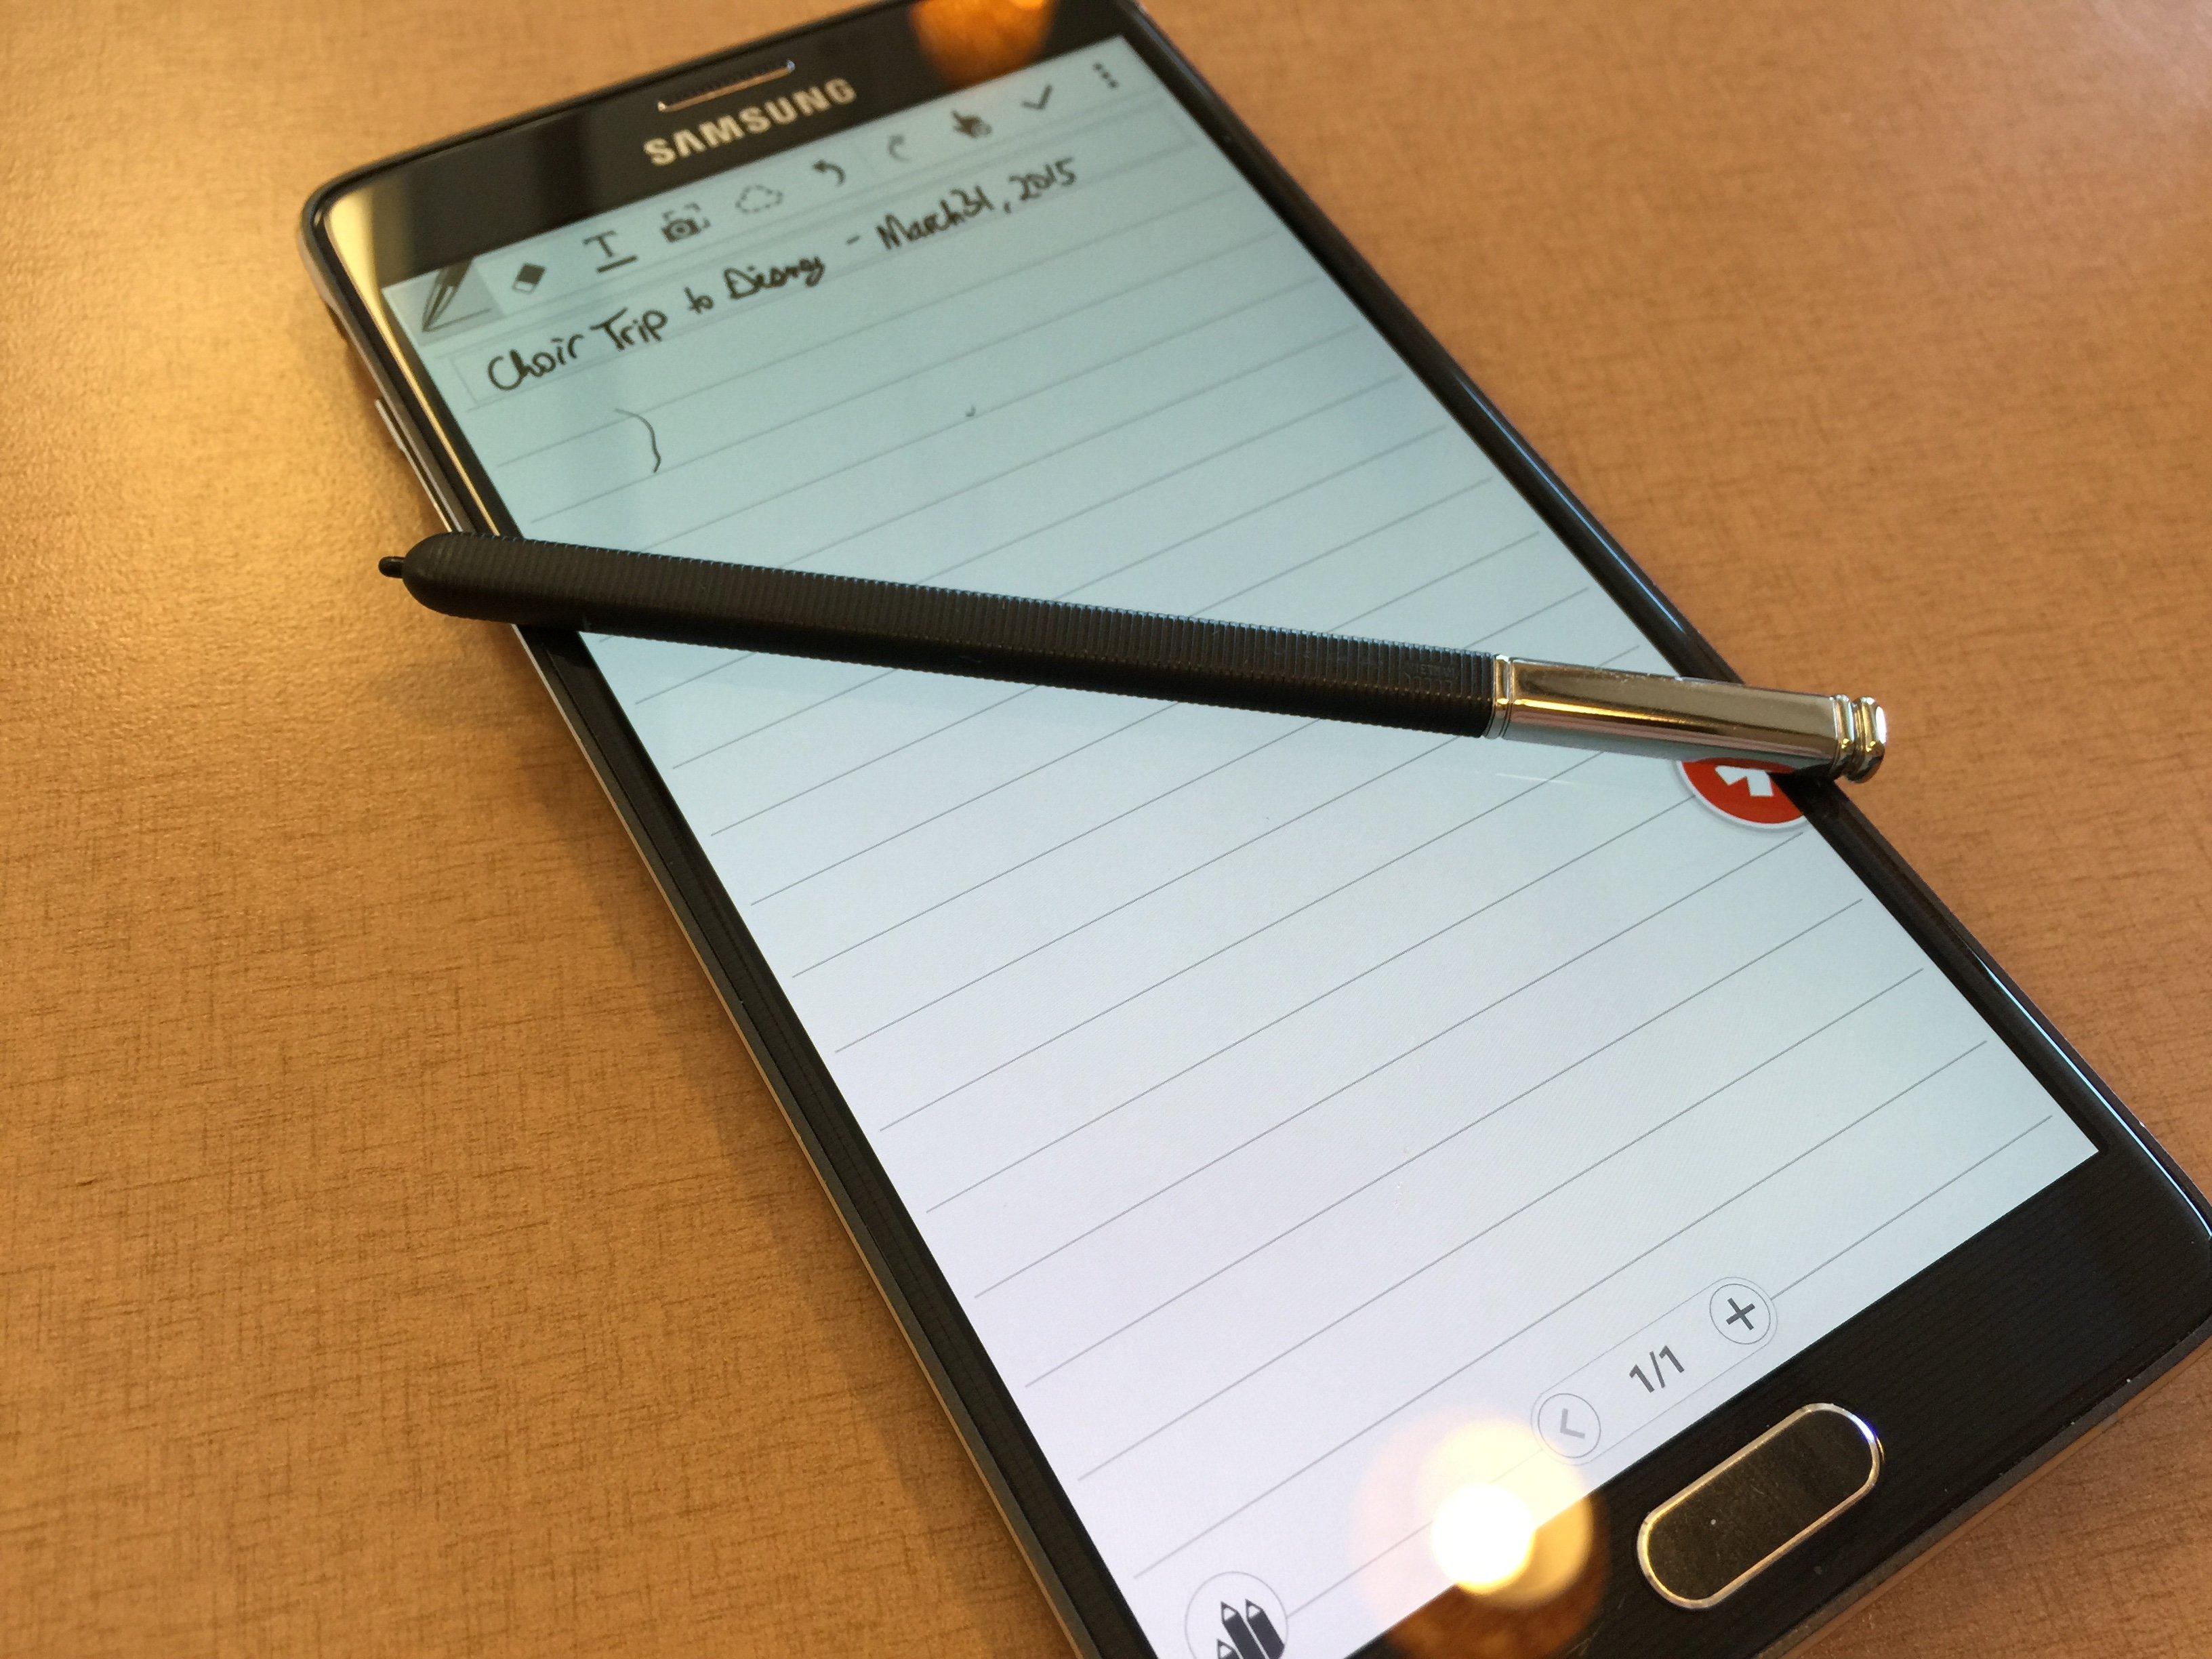 How to Master S Note on the Samsung Galaxy Note 4